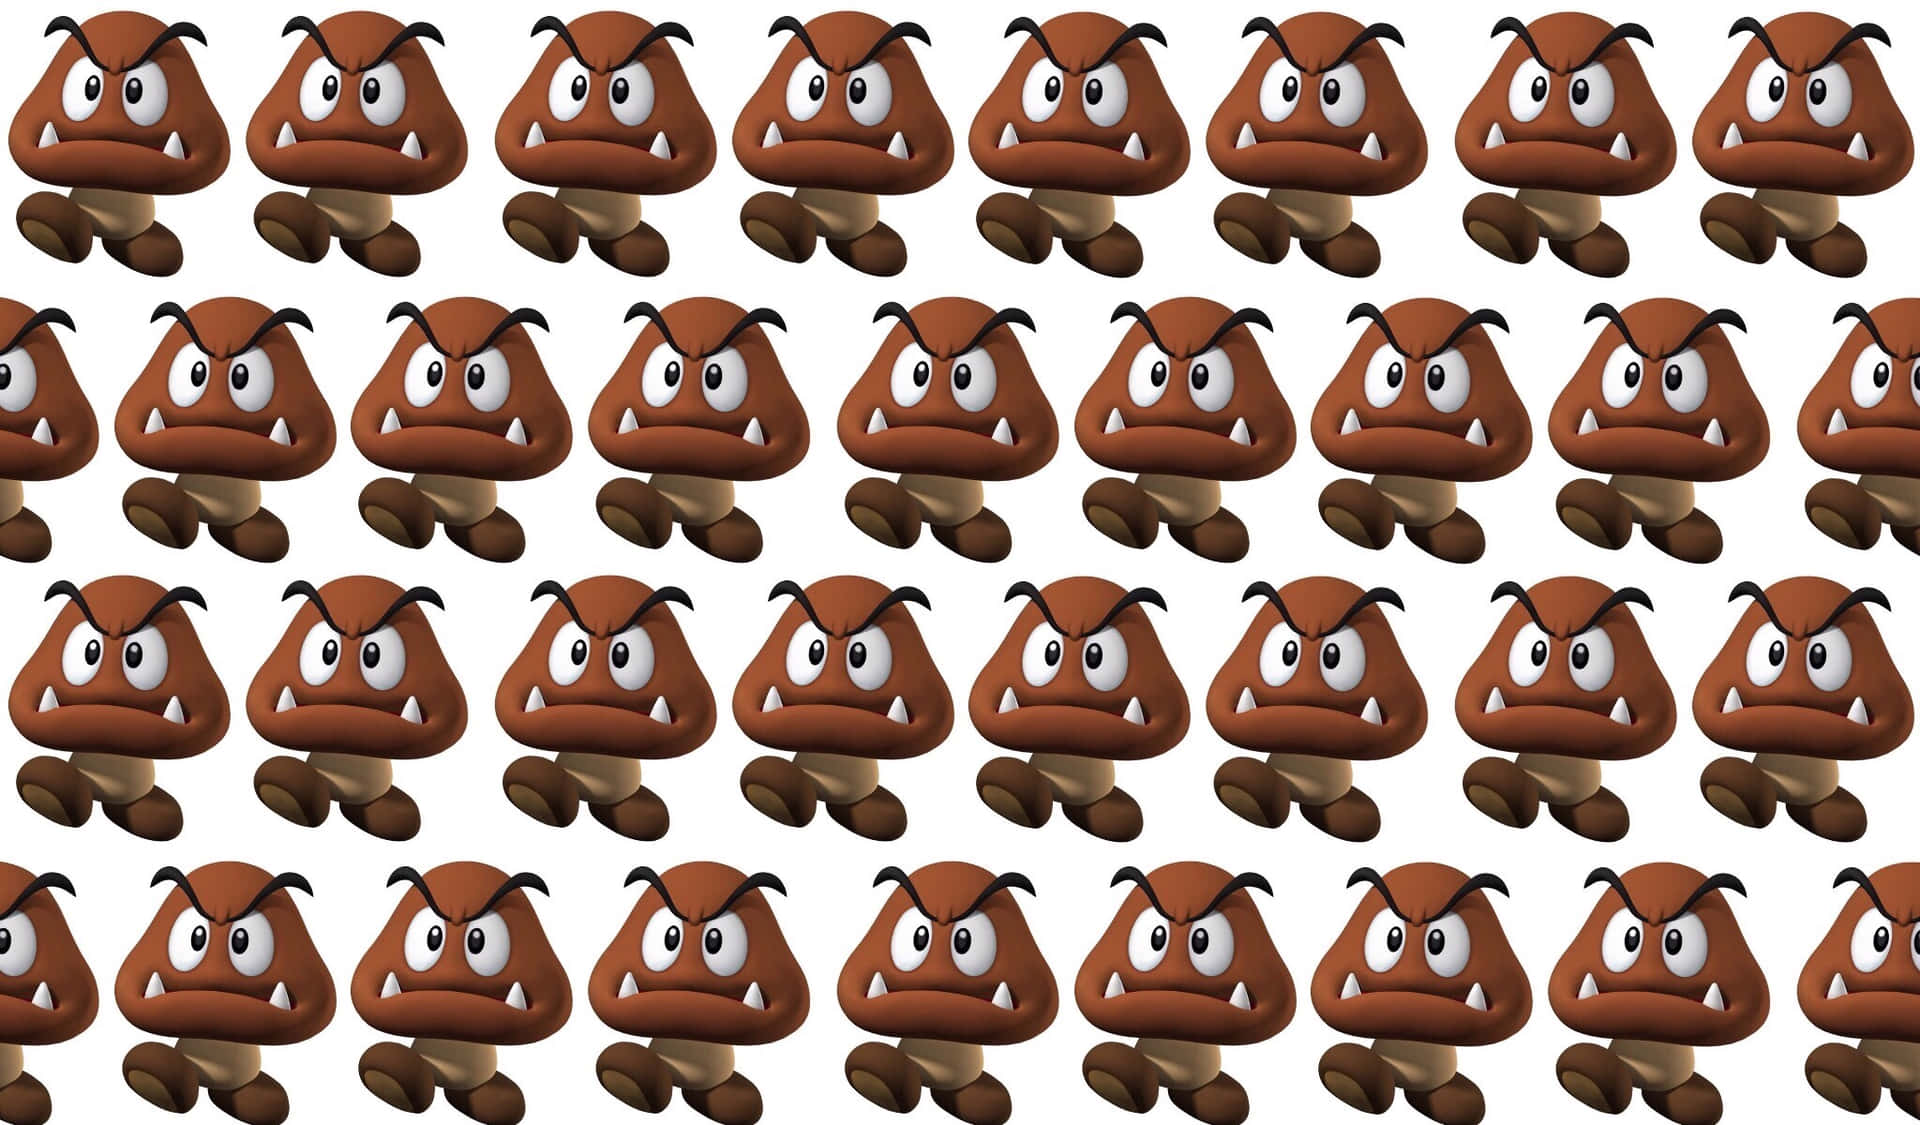 A Smiling Goomba from Super Mario Games Wallpaper